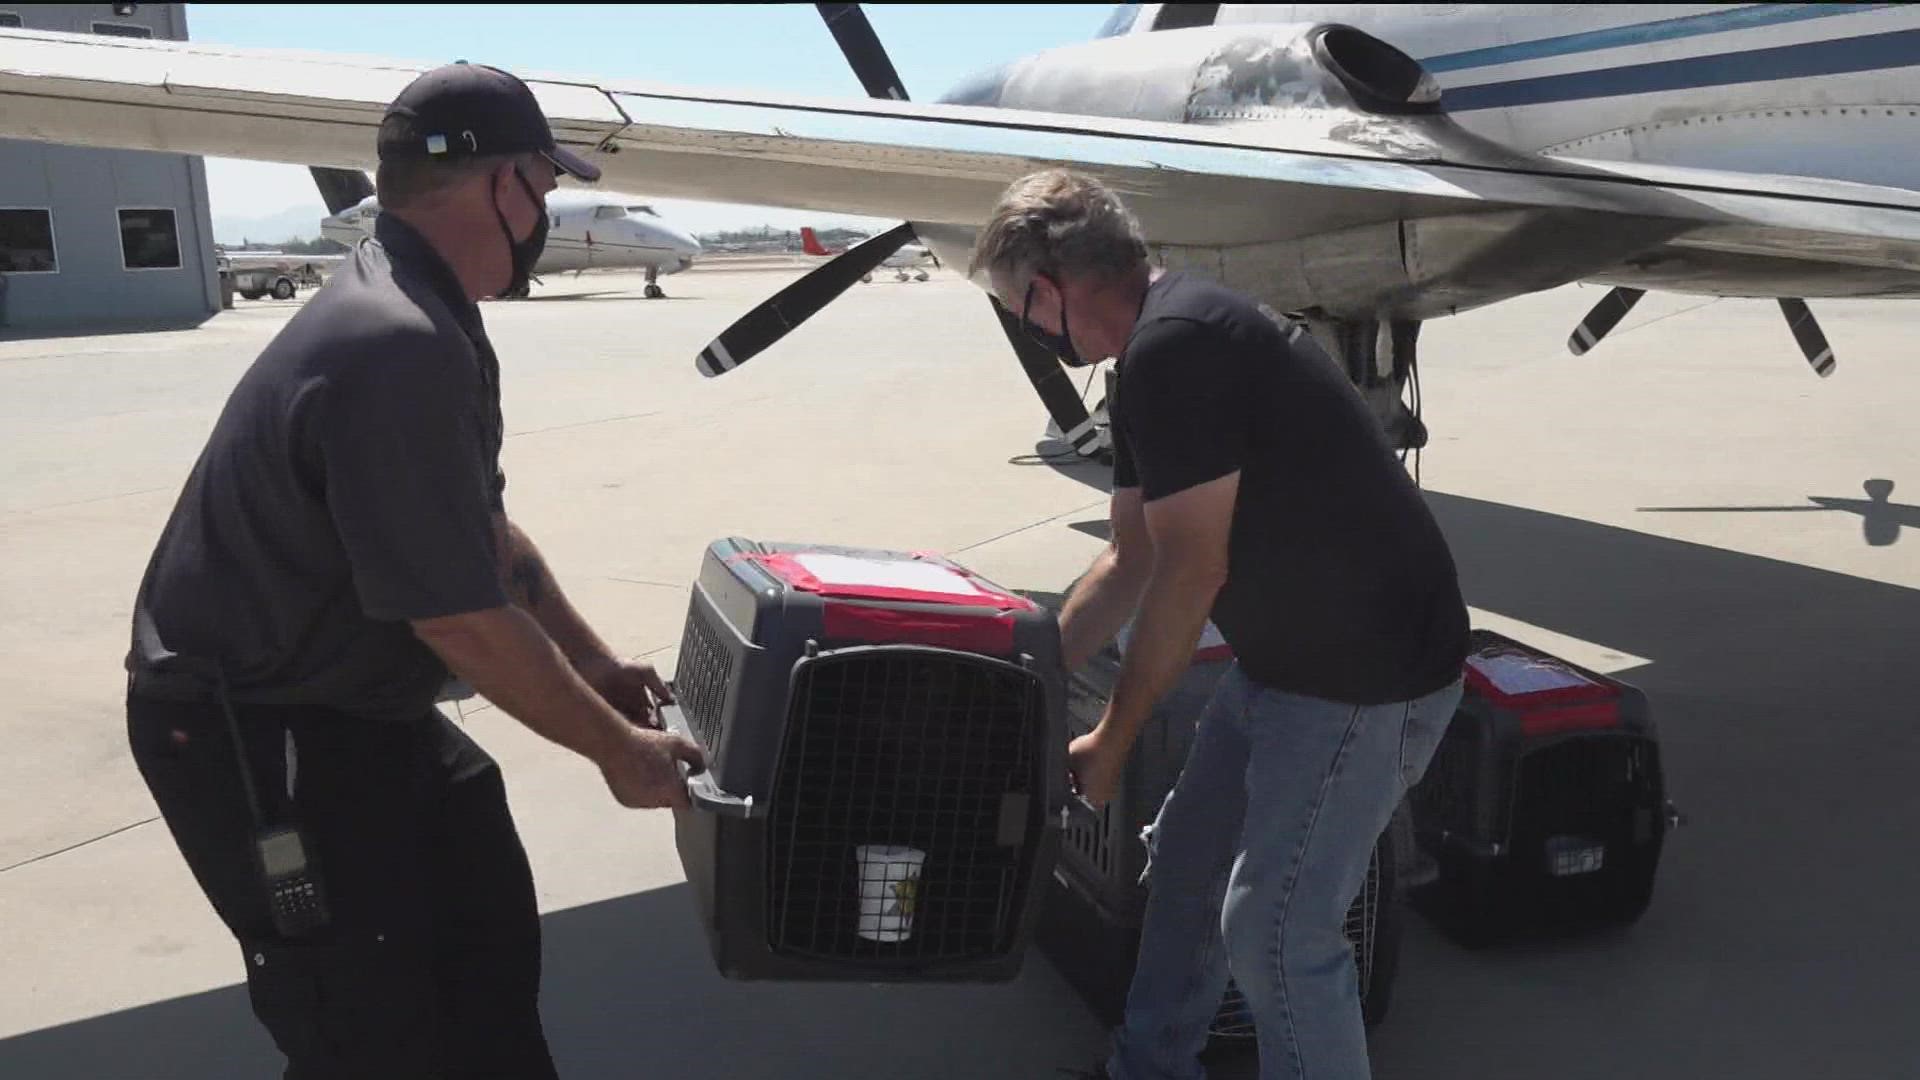 An emergency flight out of Louisiana carrying dozens of adoptable dogs and cats landed in El Cajon Saturday after facing the threat of Hurricane Ida.